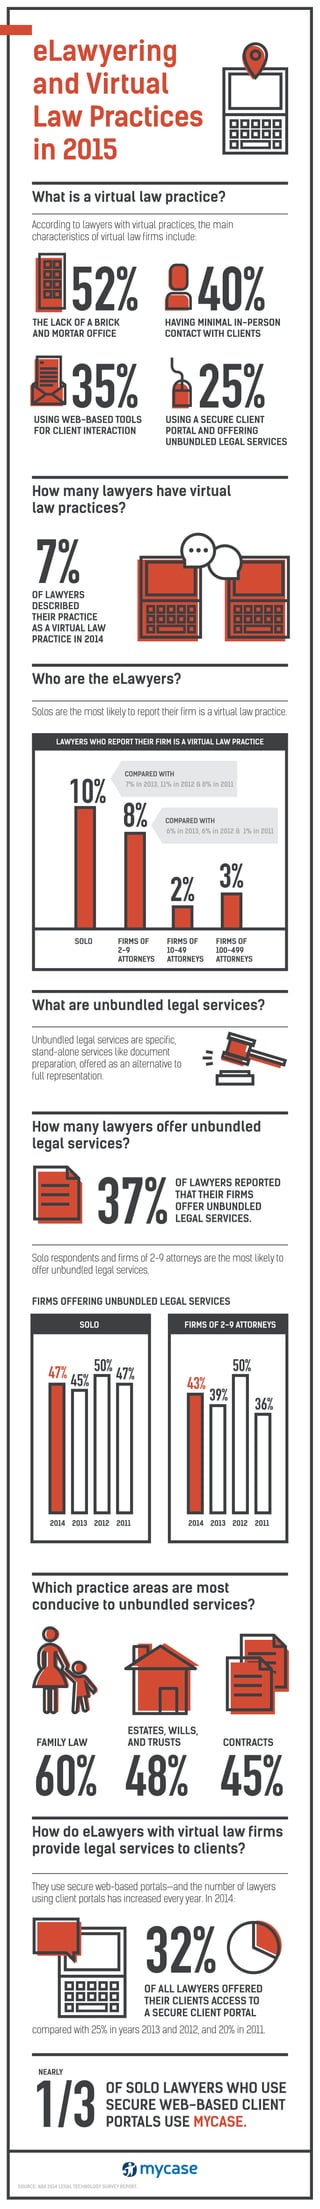 What is a virtual law practice?
How many lawyers have virtual
law practices?
Who are the eLawyers?
What are unbundled legal services?
How many lawyers offer unbundled
legal services?
Which practice areas are most
conducive to unbundled services?
How do eLawyers with virtual law firms
provide legal services to clients?
eLawyering
and Virtual
Law Practices
in 2015
52%THE LACK OF A BRICK
AND MORTAR OFFICE
40%HAVING MINIMAL IN-PERSON
CONTACT WITH CLIENTS
35%USING WEB-BASED TOOLS
FOR CLIENT INTERACTION
25%USING A SECURE CLIENT
PORTAL AND OFFERING
UNBUNDLED LEGAL SERVICES
According to lawyers with virtual practices, the main
characteristics of virtual law firms include:
Solos are the most likely to report their firm is a virtual law practice.
7%OF LAWYERS
DESCRIBED
THEIR PRACTICE
AS A VIRTUAL LAW
PRACTICE IN 2014
SOLO
10%
FIRMS OF
2-9
ATTORNEYS
8% 6% in 2013, 6% in 2012 & 1% in 2011
COMPARED WITH
7% in 2013, 11% in 2012 & 8% in 2011
COMPARED WITH
FIRMS OF
10-49
ATTORNEYS
2%
FIRMS OF
100-499
ATTORNEYS
3%
LAWYERS WHO REPORT THEIR FIRM IS A VIRTUAL LAW PRACTICE
Unbundled legal services are specific,
stand-alone services like document
preparation, offered as an alternative to
full representation.
Solo respondents and firms of 2-9 attorneys are the most likely to
offer unbundled legal services.
37%
OF LAWYERS REPORTED
THAT THEIR FIRMS
OFFER UNBUNDLED
LEGAL SERVICES.
SOLO FIRMS OF 2-9 ATTORNEYS
47% 45%
50% 47%
43%
39%
50%
36%
FIRMS OFFERING UNBUNDLED LEGAL SERVICES
2014 2013 2012 2011 2014 2013 2012 2011
60% 48% 45%
FAMILY LAW
ESTATES, WILLS,
AND TRUSTS CONTRACTS
They use secure web-based portals—and the number of lawyers
using client portals has increased every year. In 2014:
compared with 25% in years 2013 and 2012, and 20% in 2011.
32%OF ALL LAWYERS OFFERED
THEIR CLIENTS ACCESS TO
A SECURE CLIENT PORTAL
1/3
OF SOLO LAWYERS WHO USE
SECURE WEB-BASED CLIENT
PORTALS USE MYCASE.
NEARLY
SOURCE: ABA 2014 LEGAL TECHNOLOGY SURVEY REPORT.
 